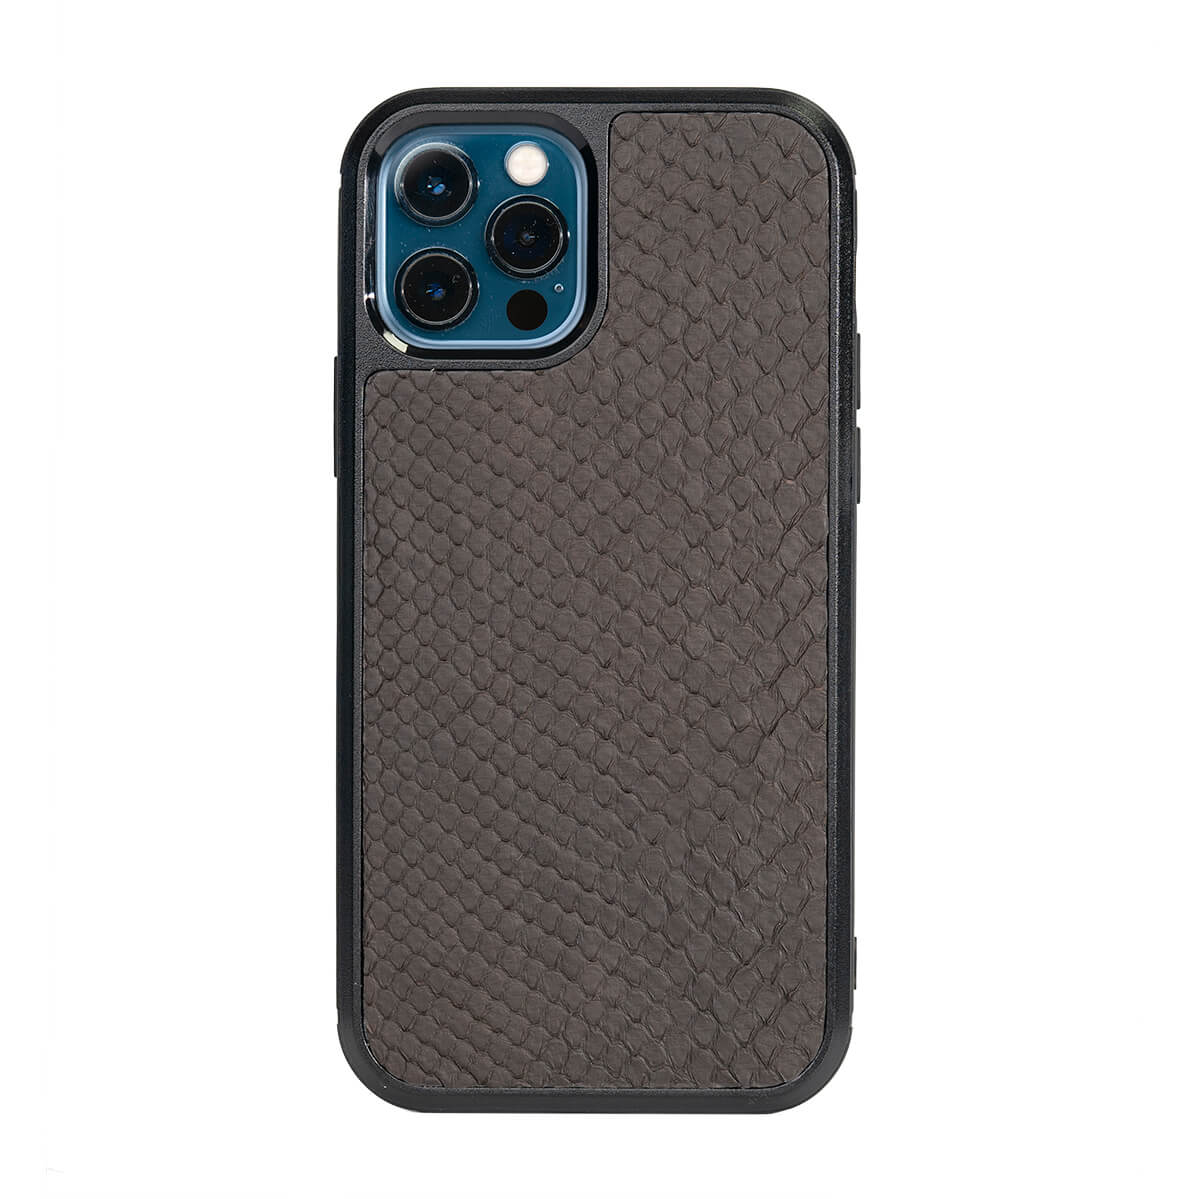 IPHONE 12 PRO & 12 CASES PYTHON RURAL EARTH